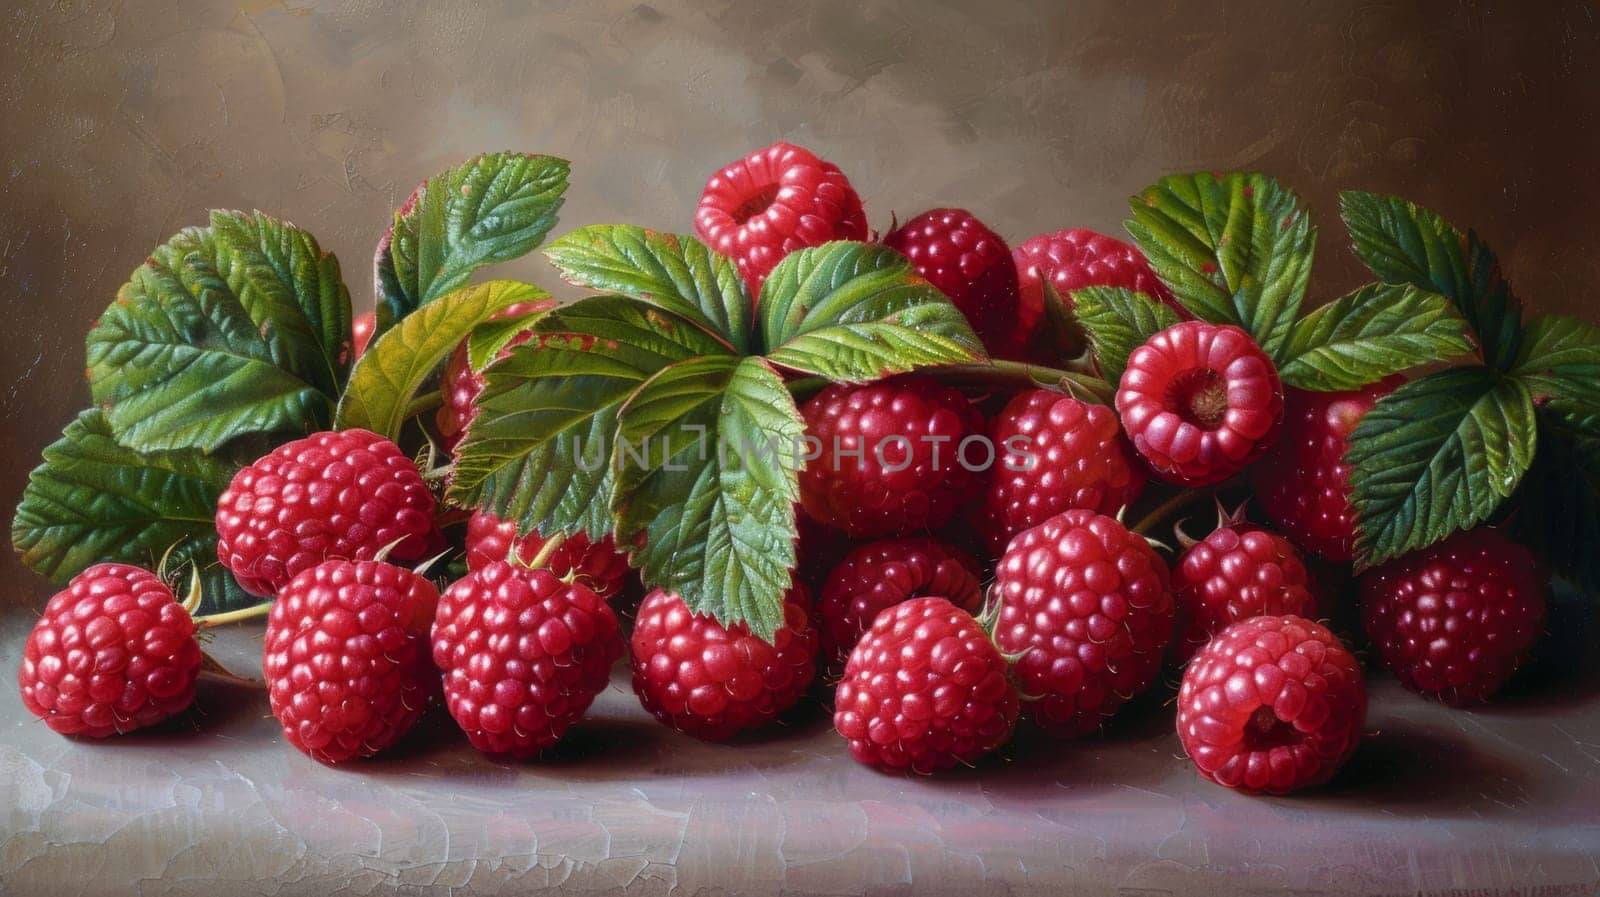 A painting of a bunch of raspberries with leaves on them, AI by starush